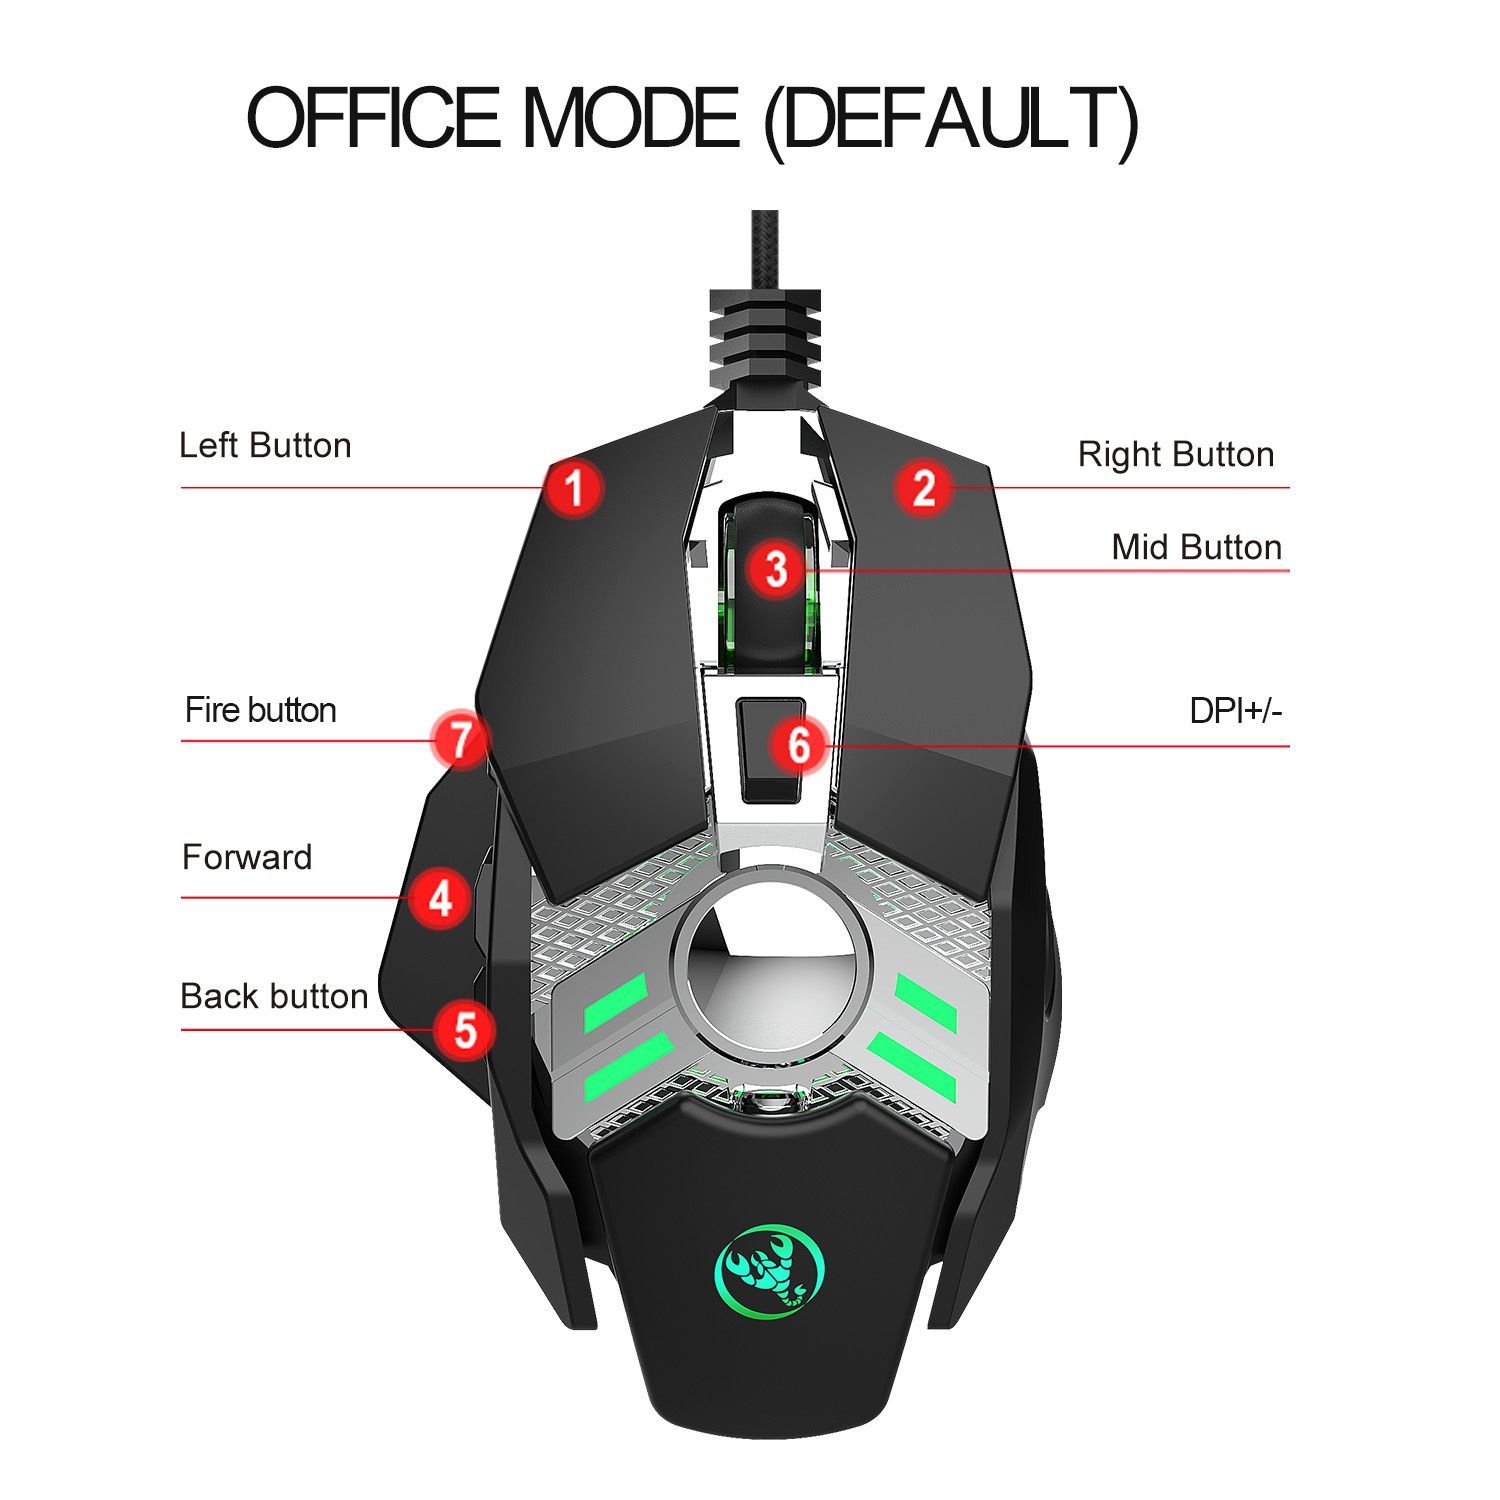 HXSJ-J200-Wired-Gaming-Mouse-6400-DPI-Seven-key-Macro-Programming-Settings-Mouse-with-Four-Adjustabl-1747597